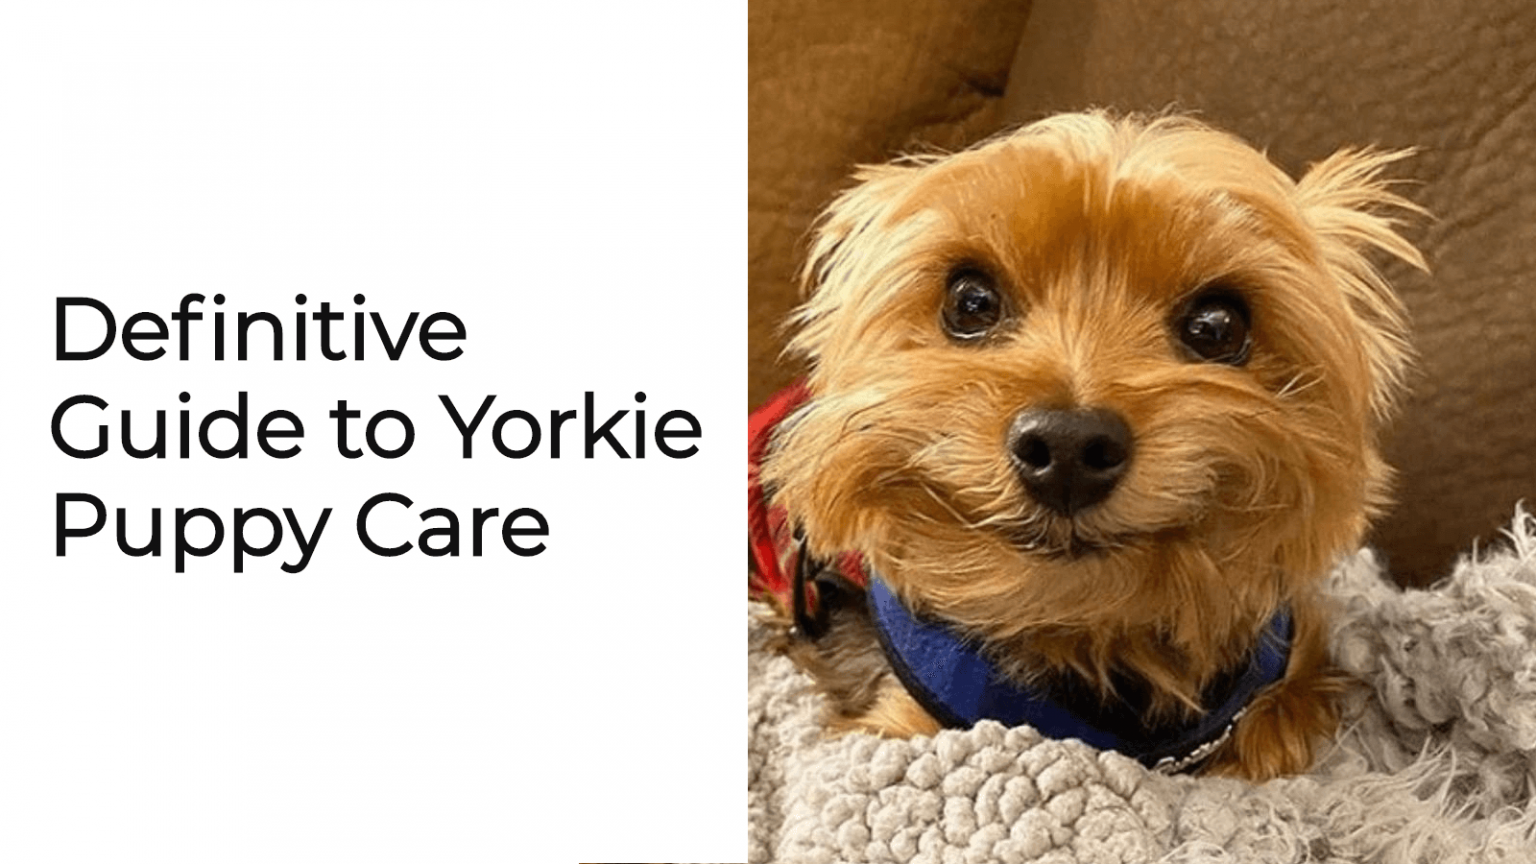 Definitive Guide To Yorkie Puppy Care 1 1536x864 